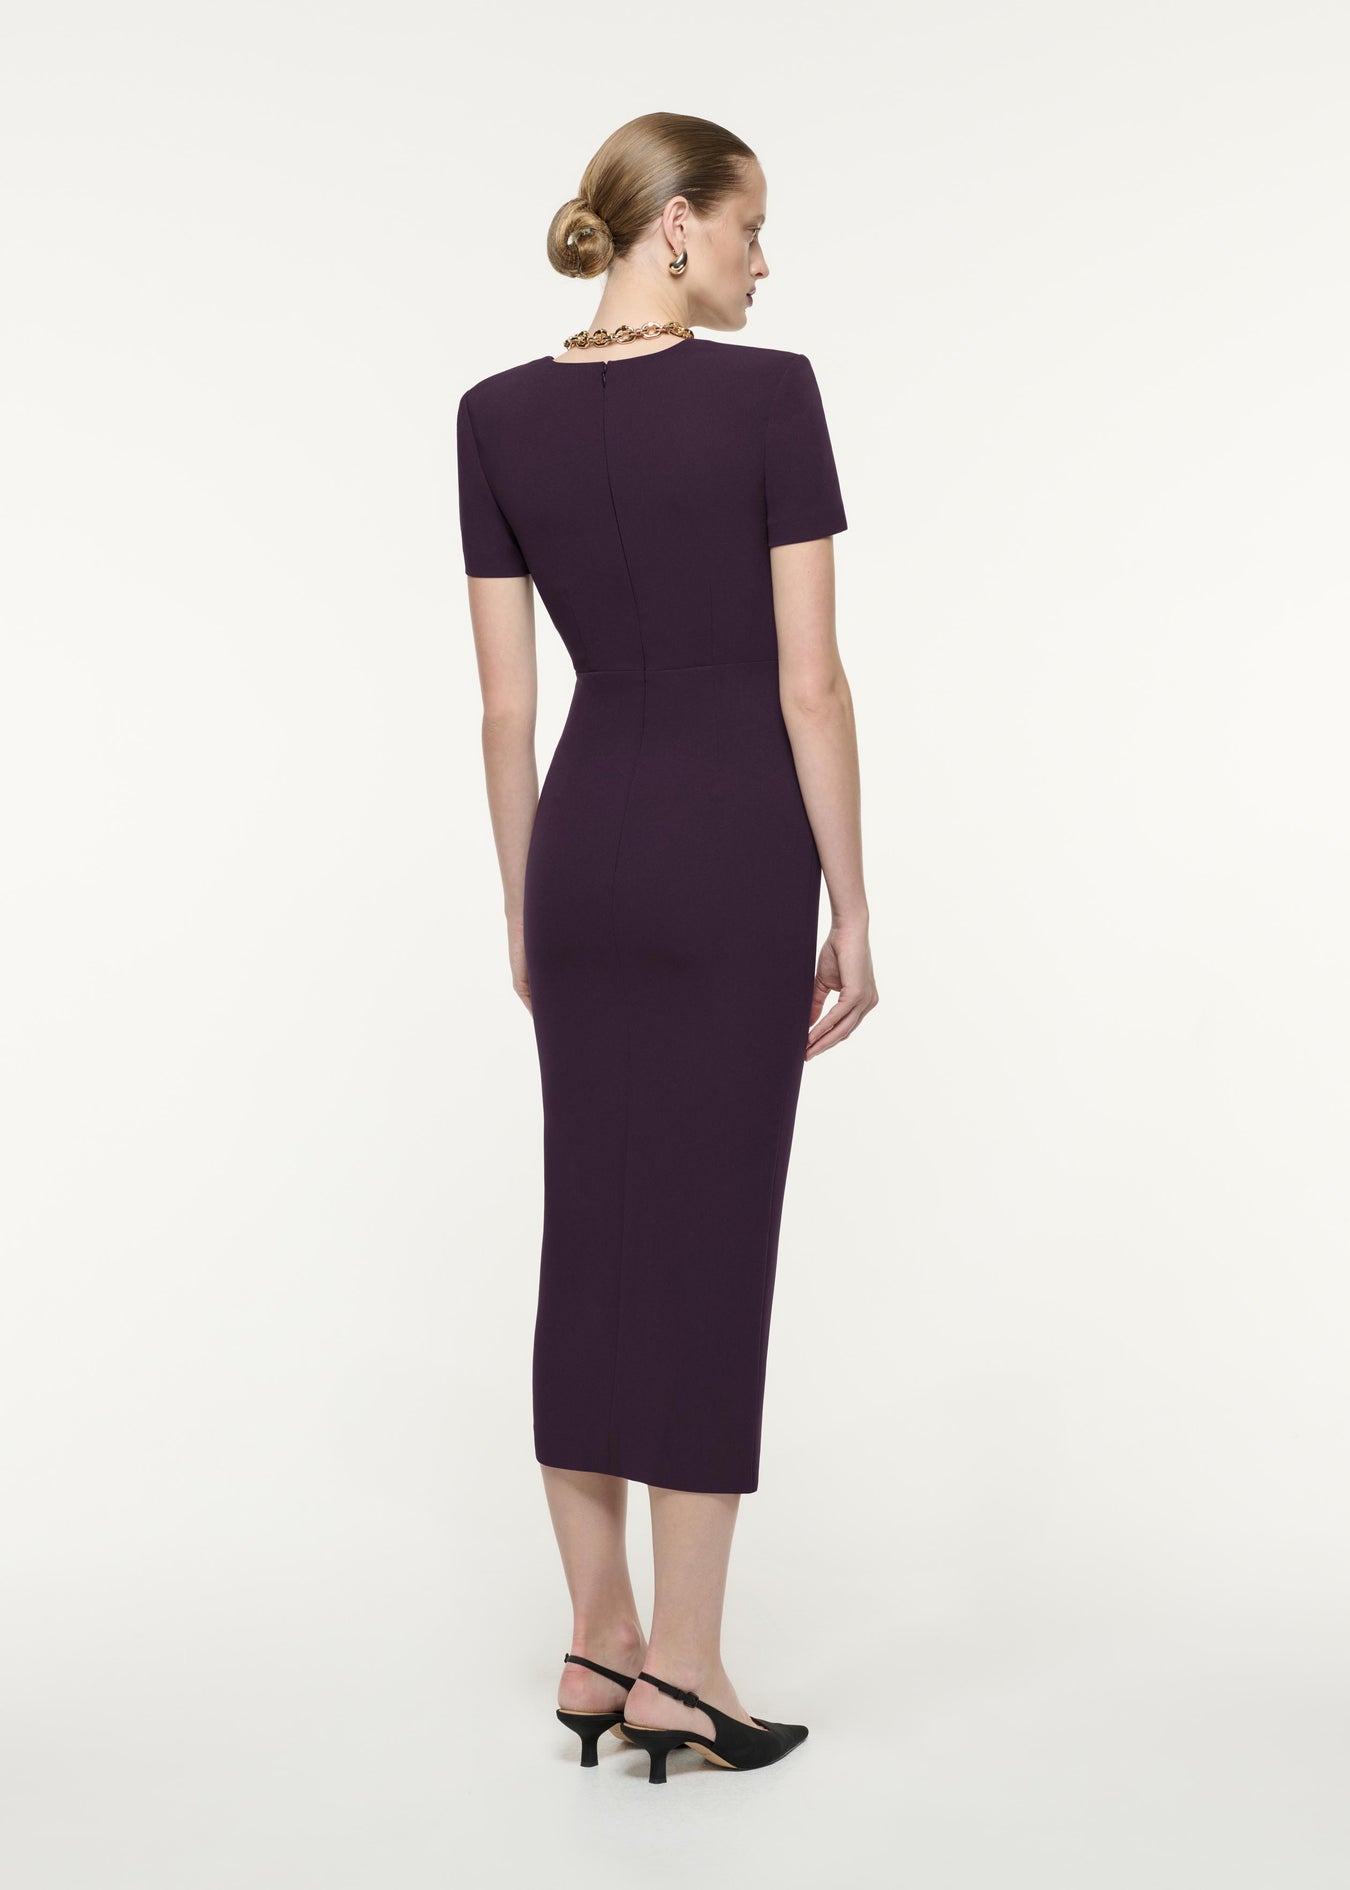 A back view image of a model wearing the Short Sleeve Heavy Cady Midi Dress in Aubergine